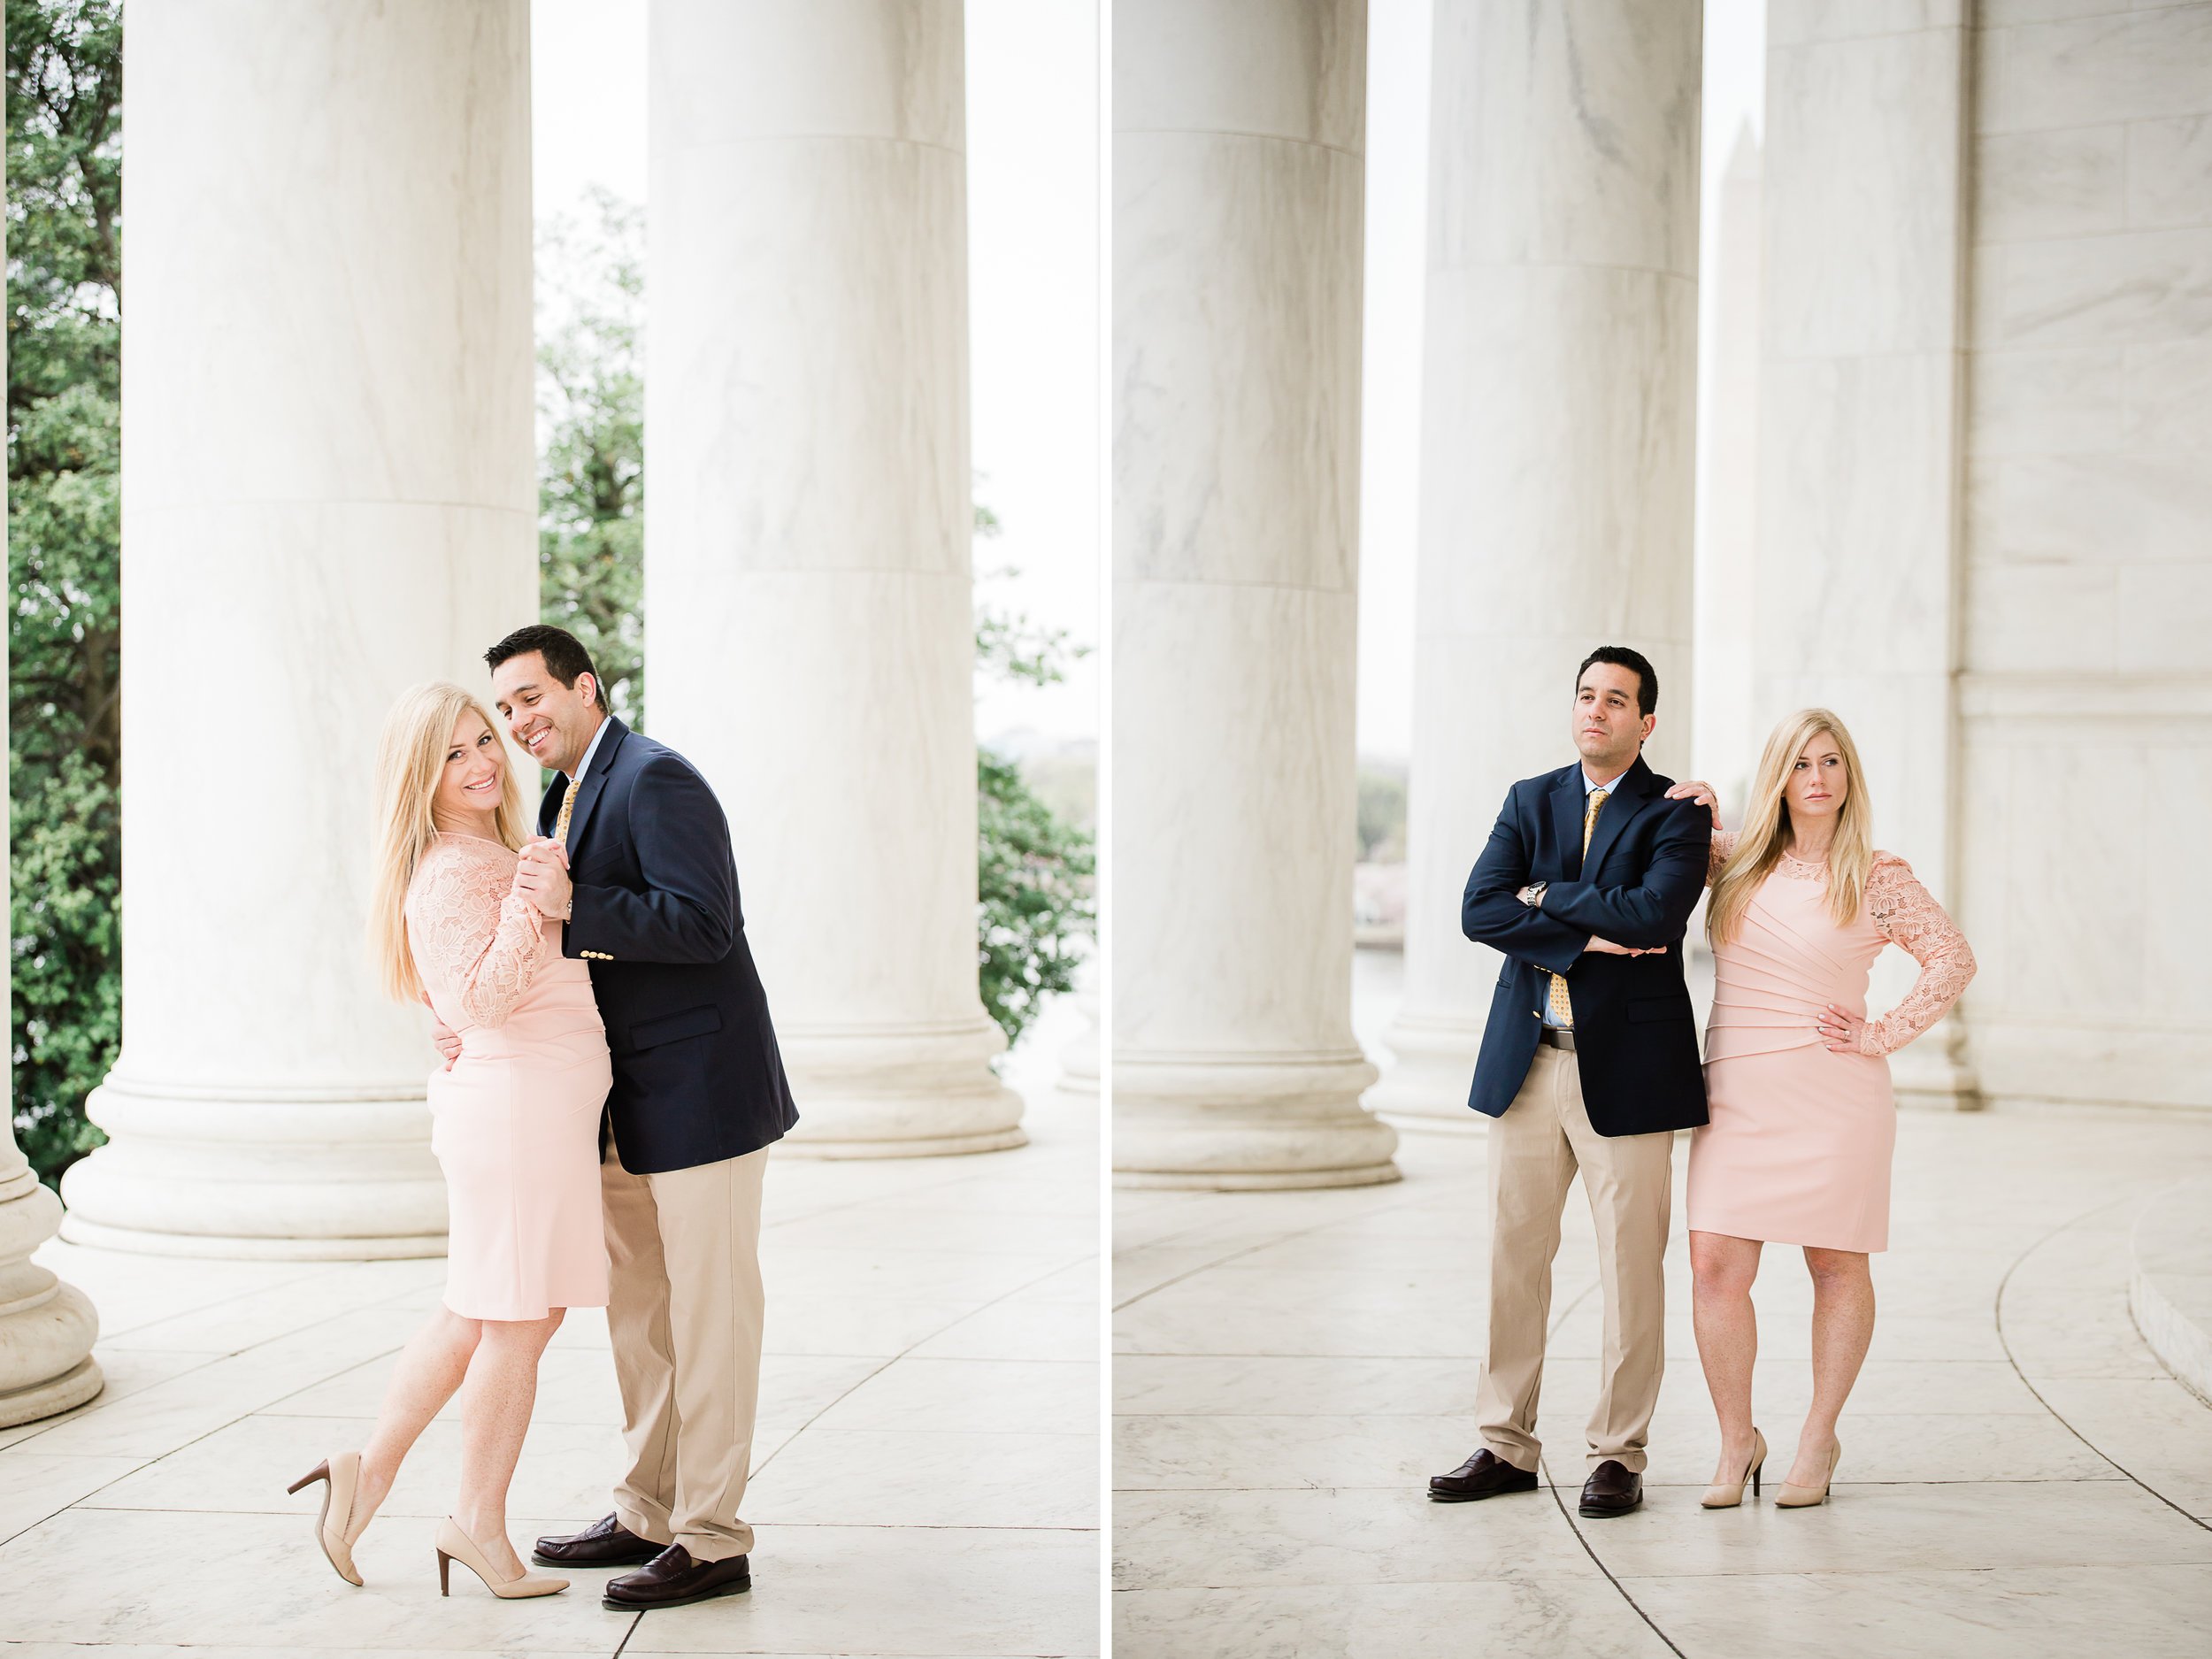 Engagement Photo Shoot in Washington DC with Cherry Blossoms